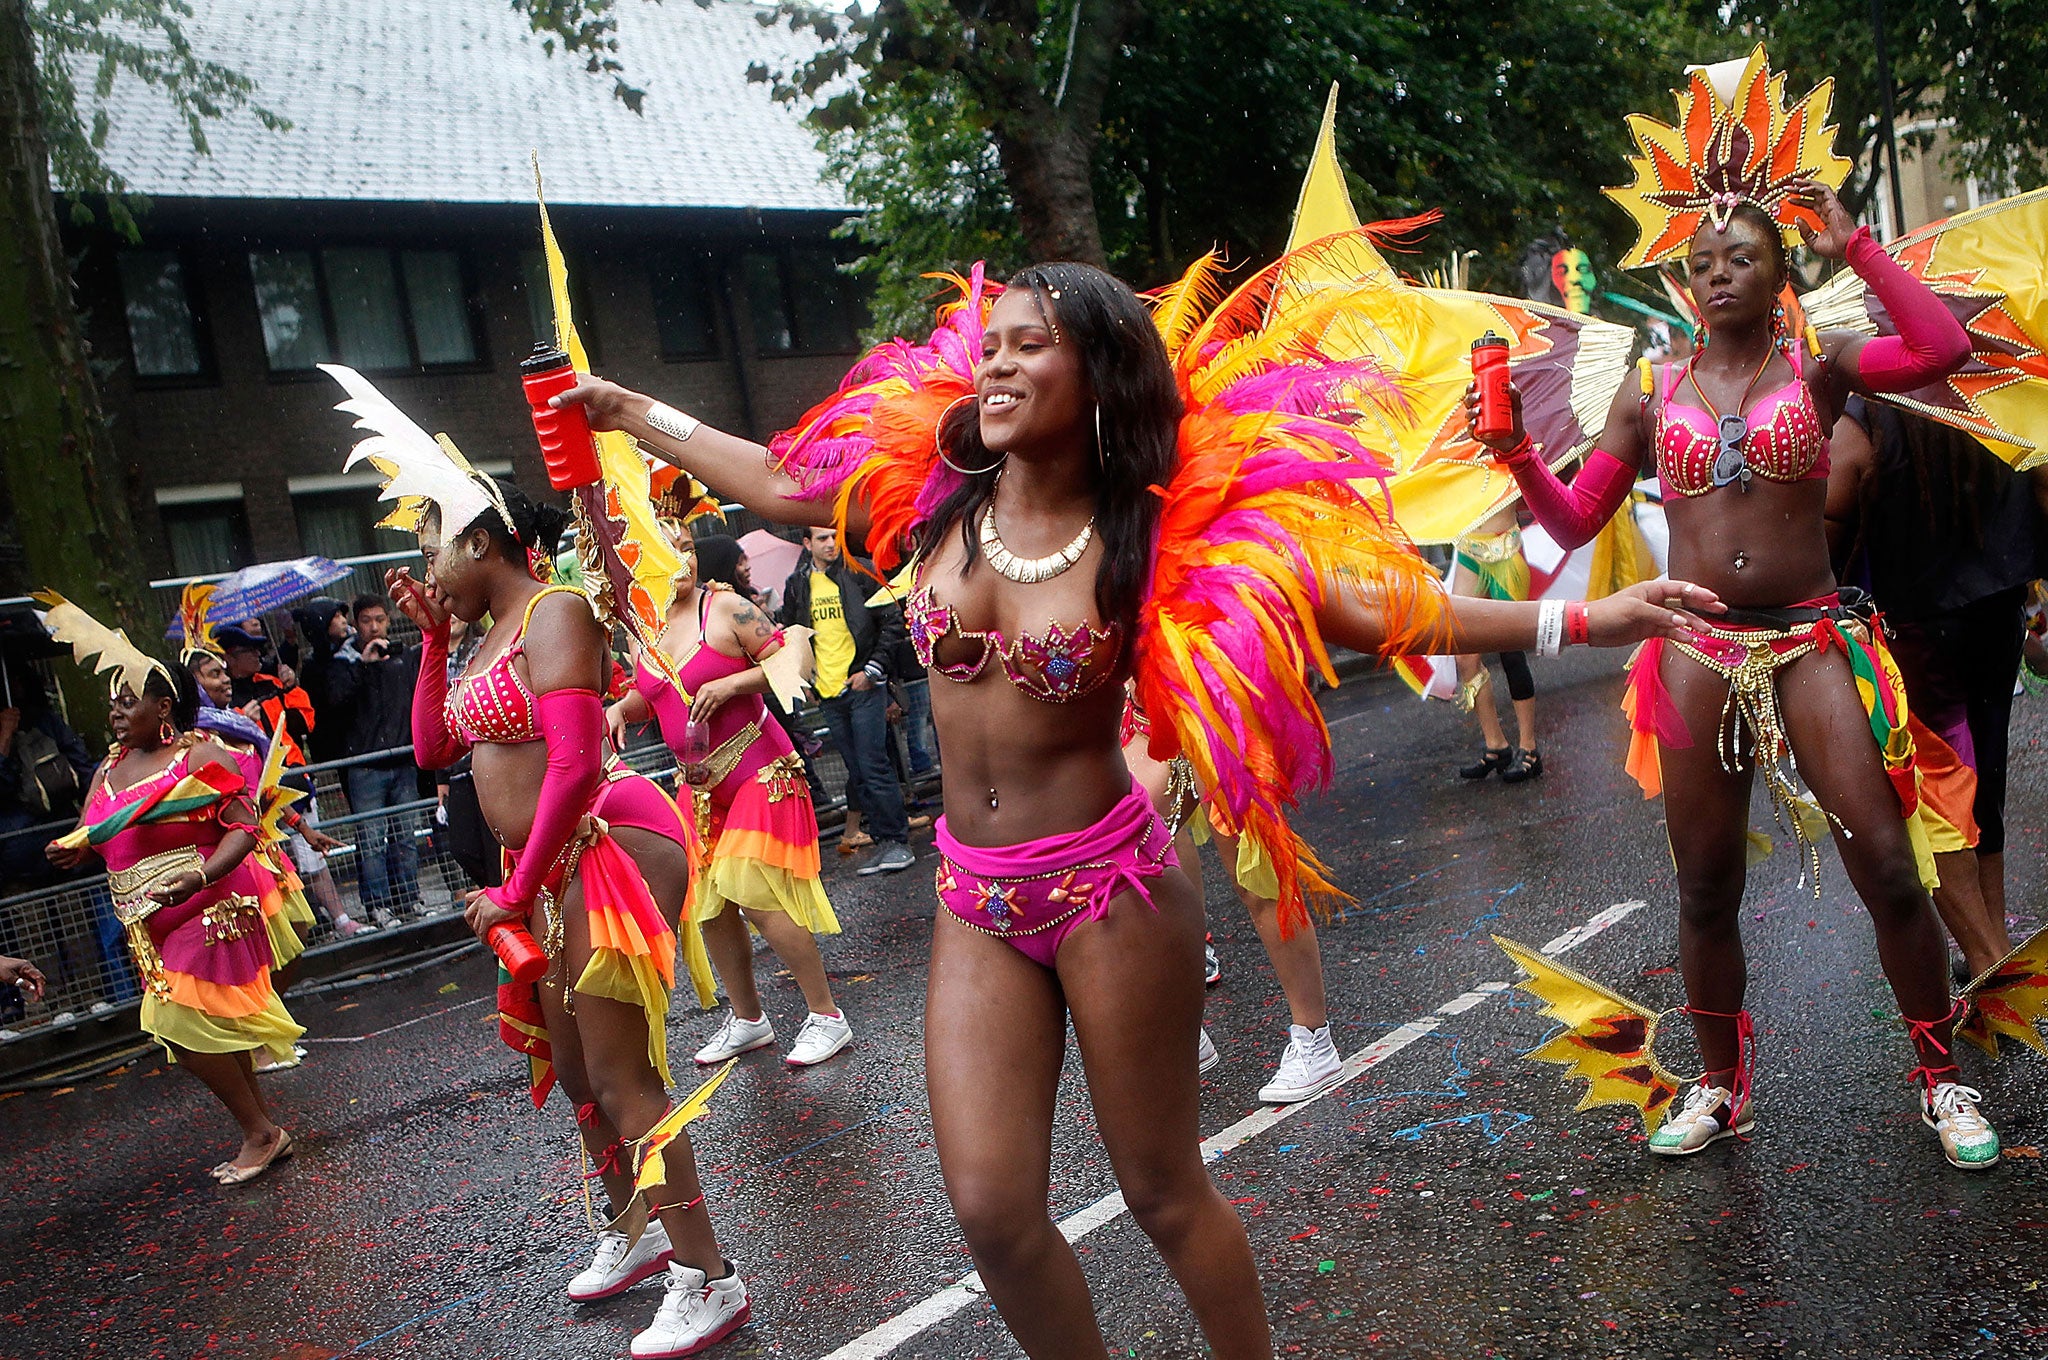 Performers dance through heavy rain during the Notting Hill Carnival in London. Despite the bad weather over 1 million visitors are expected to attend the two-day event which is the largest of its kind in Europe